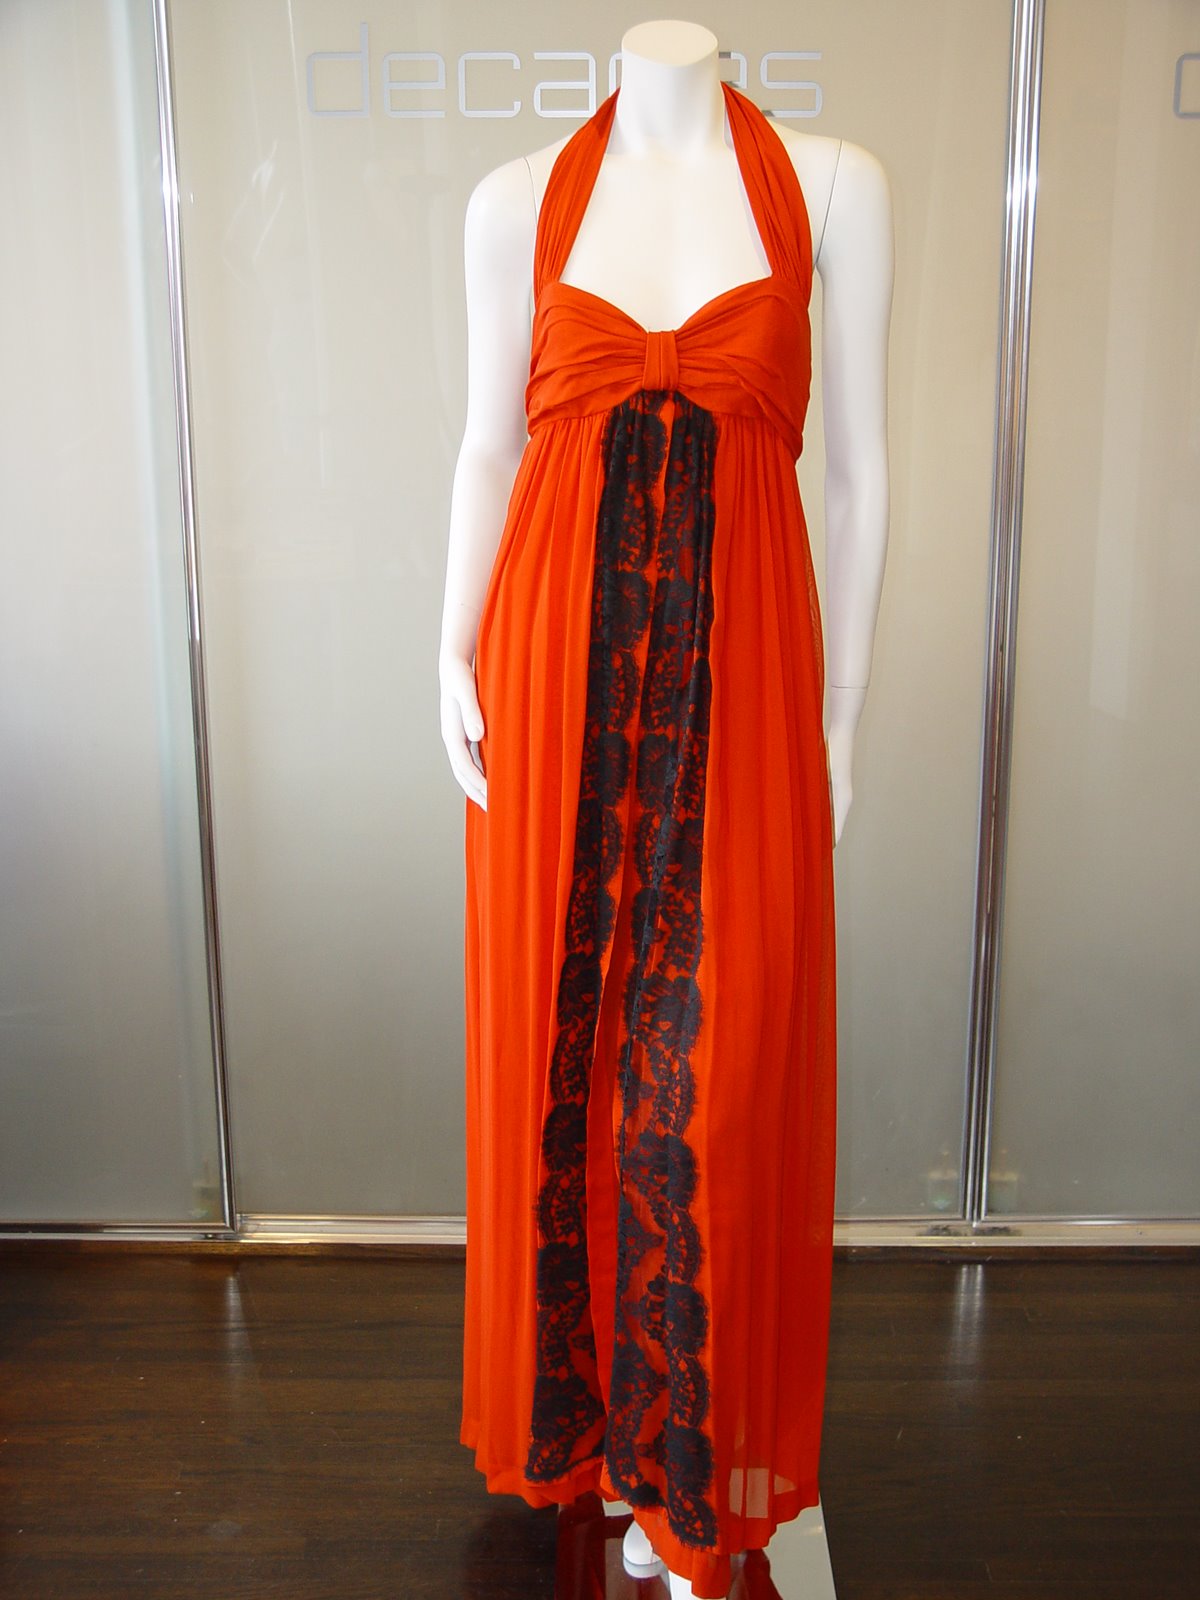 [CHRISTIAN+LACROIX+CRUISE+1994+CORAL+JUMPSUIT+HALTER+WITH+LACE+INSERT.JPG+(1).JPG]